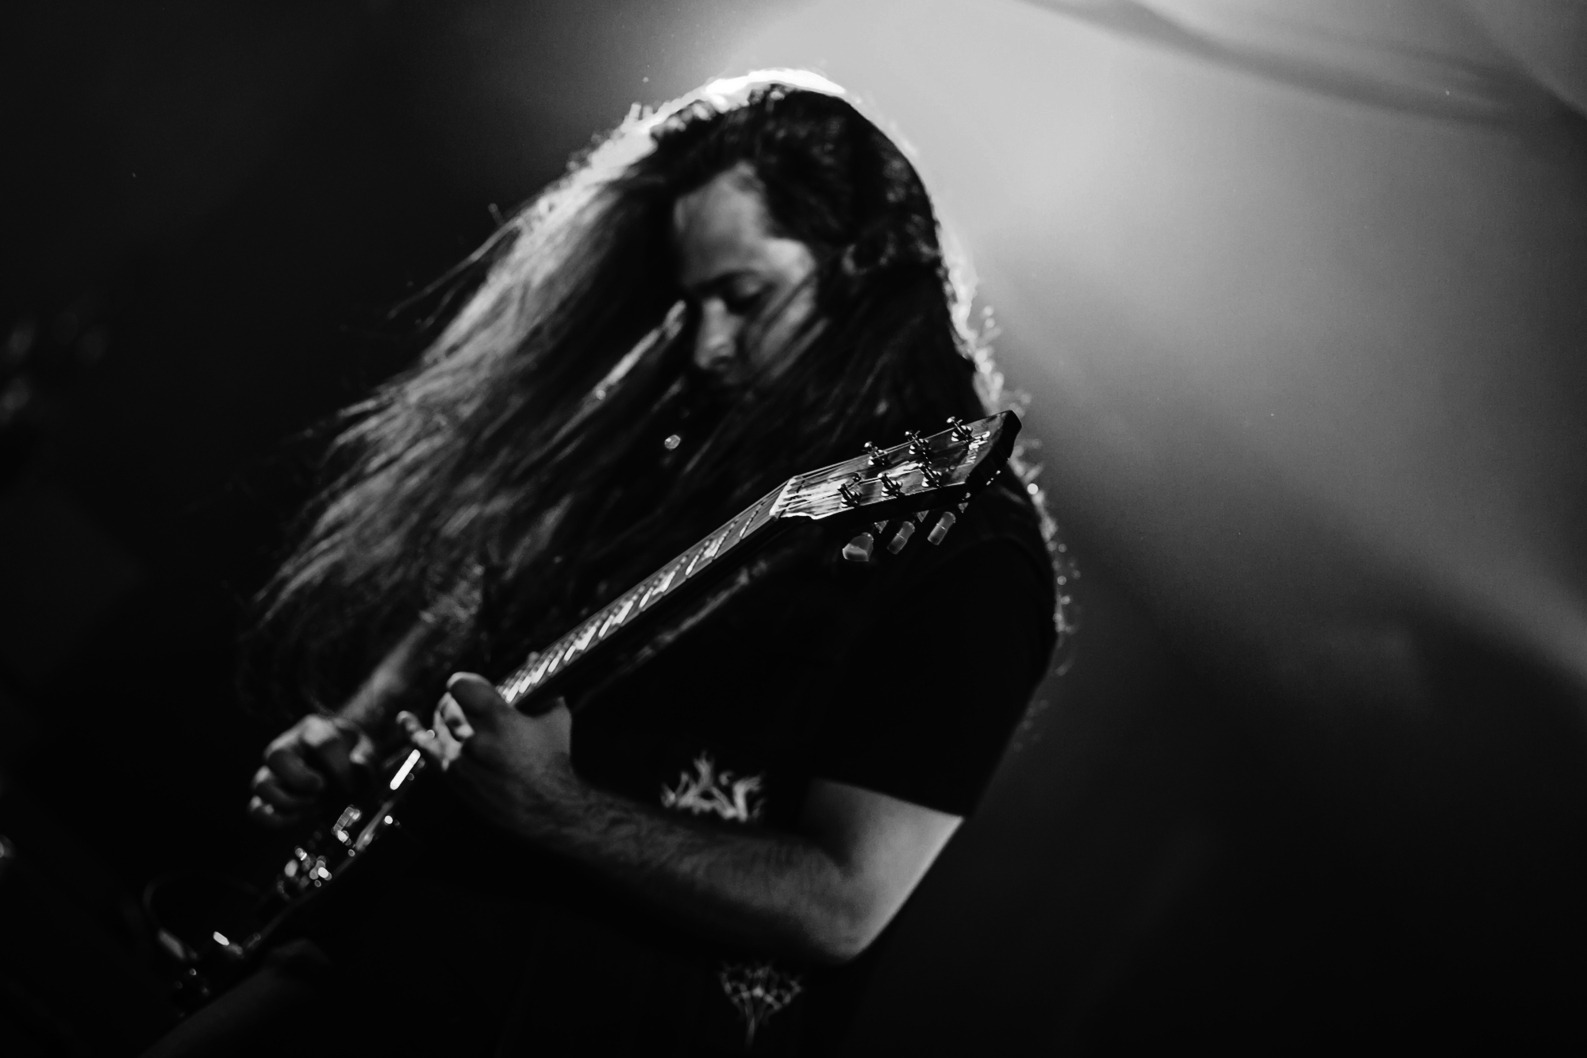 Read more about the article Black Metallers SELBST announce new album “Despondency Chord Progressions” and released first single “Chant Of Self Confrontation”.